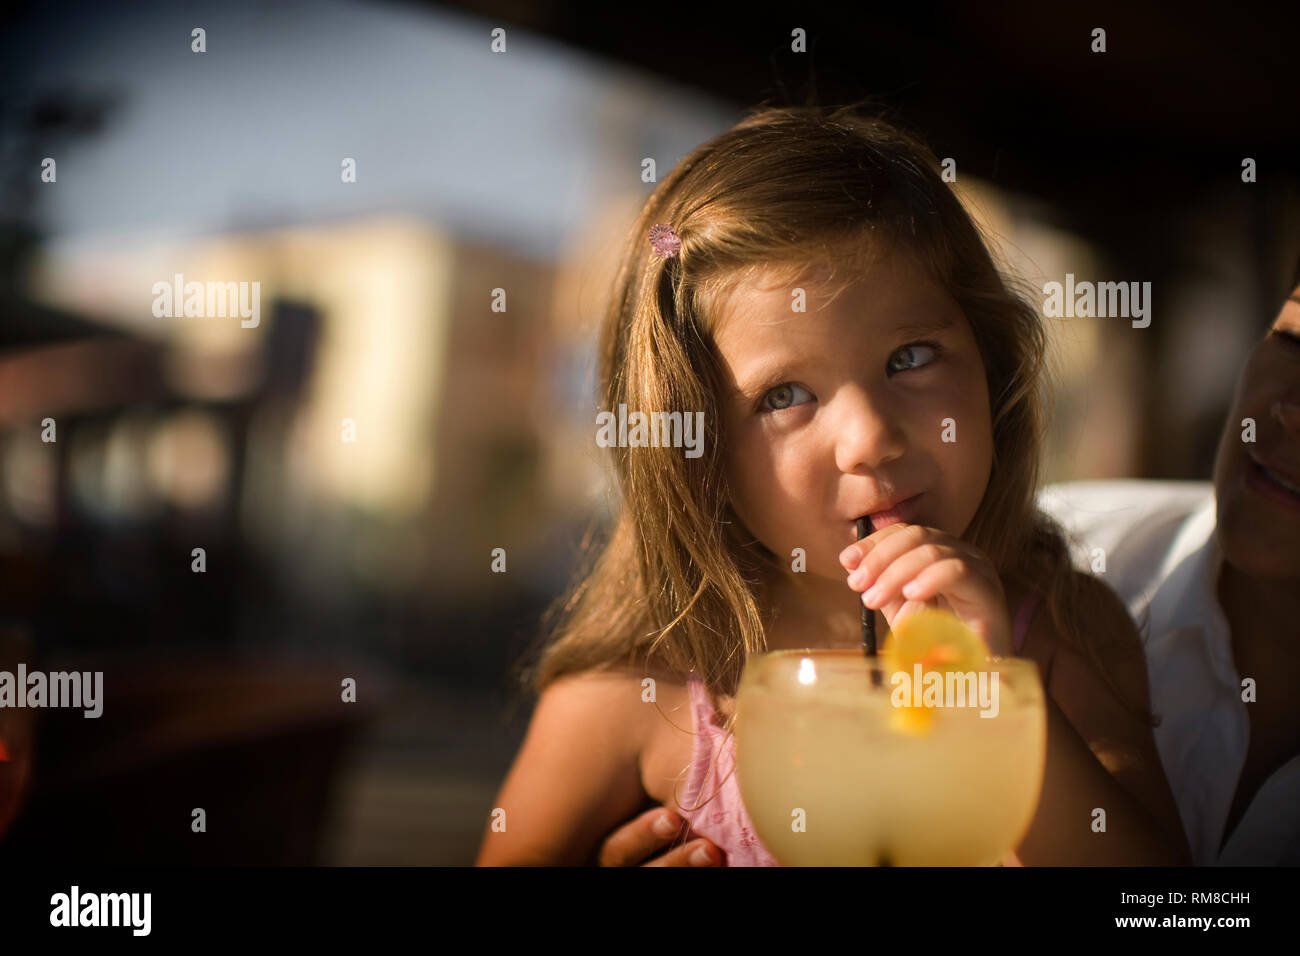 View of a small girl drinking lemonade. Stock Photo